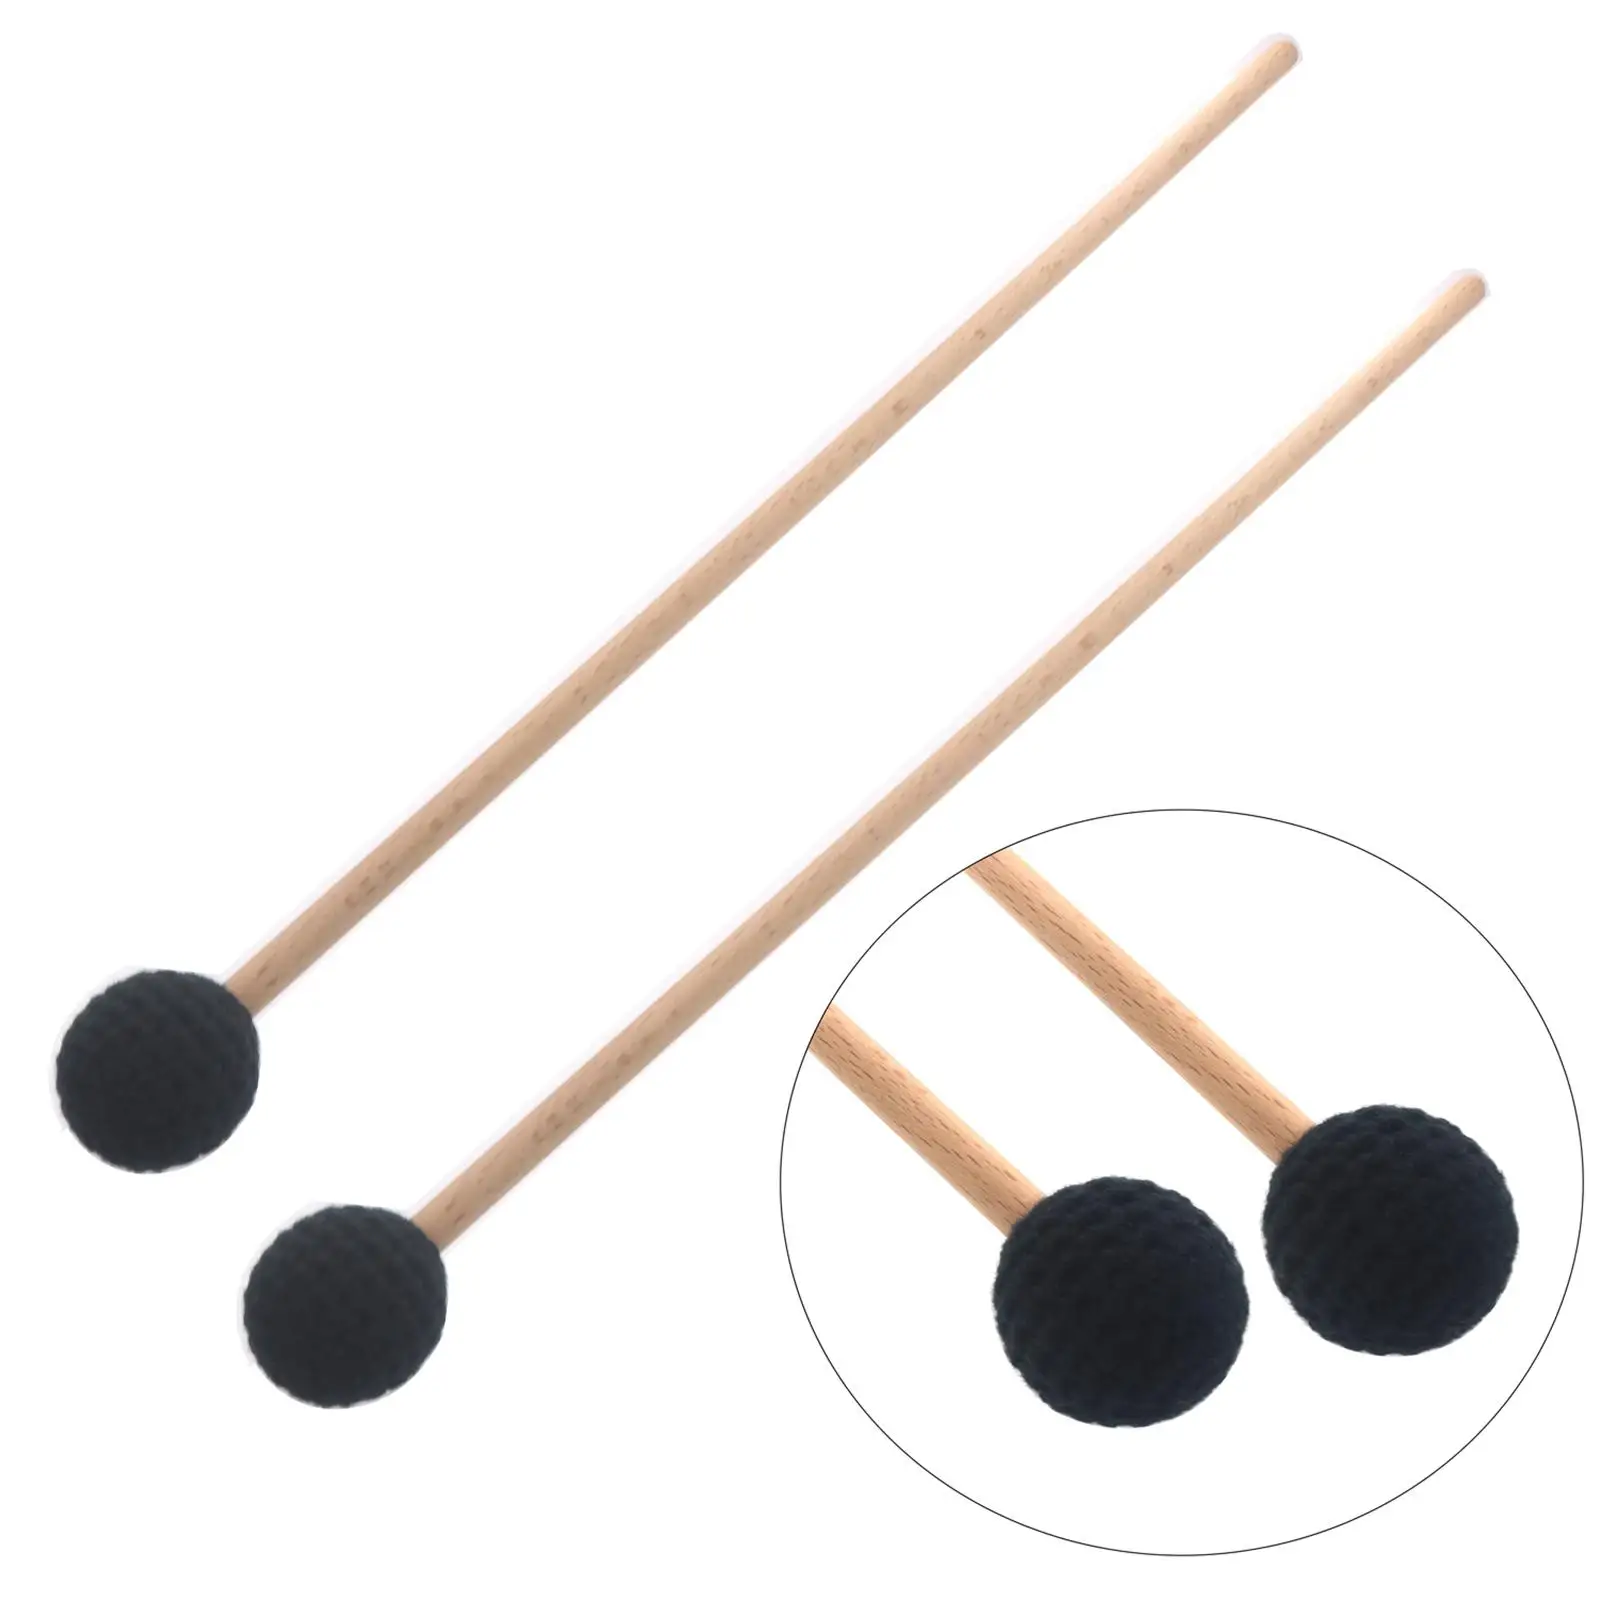 2x Percussion Xylophone Bell Mallets Percussion Instrument Kit Glockenspiel Sticks for Practitioners Gong Woodblock Drum Bells